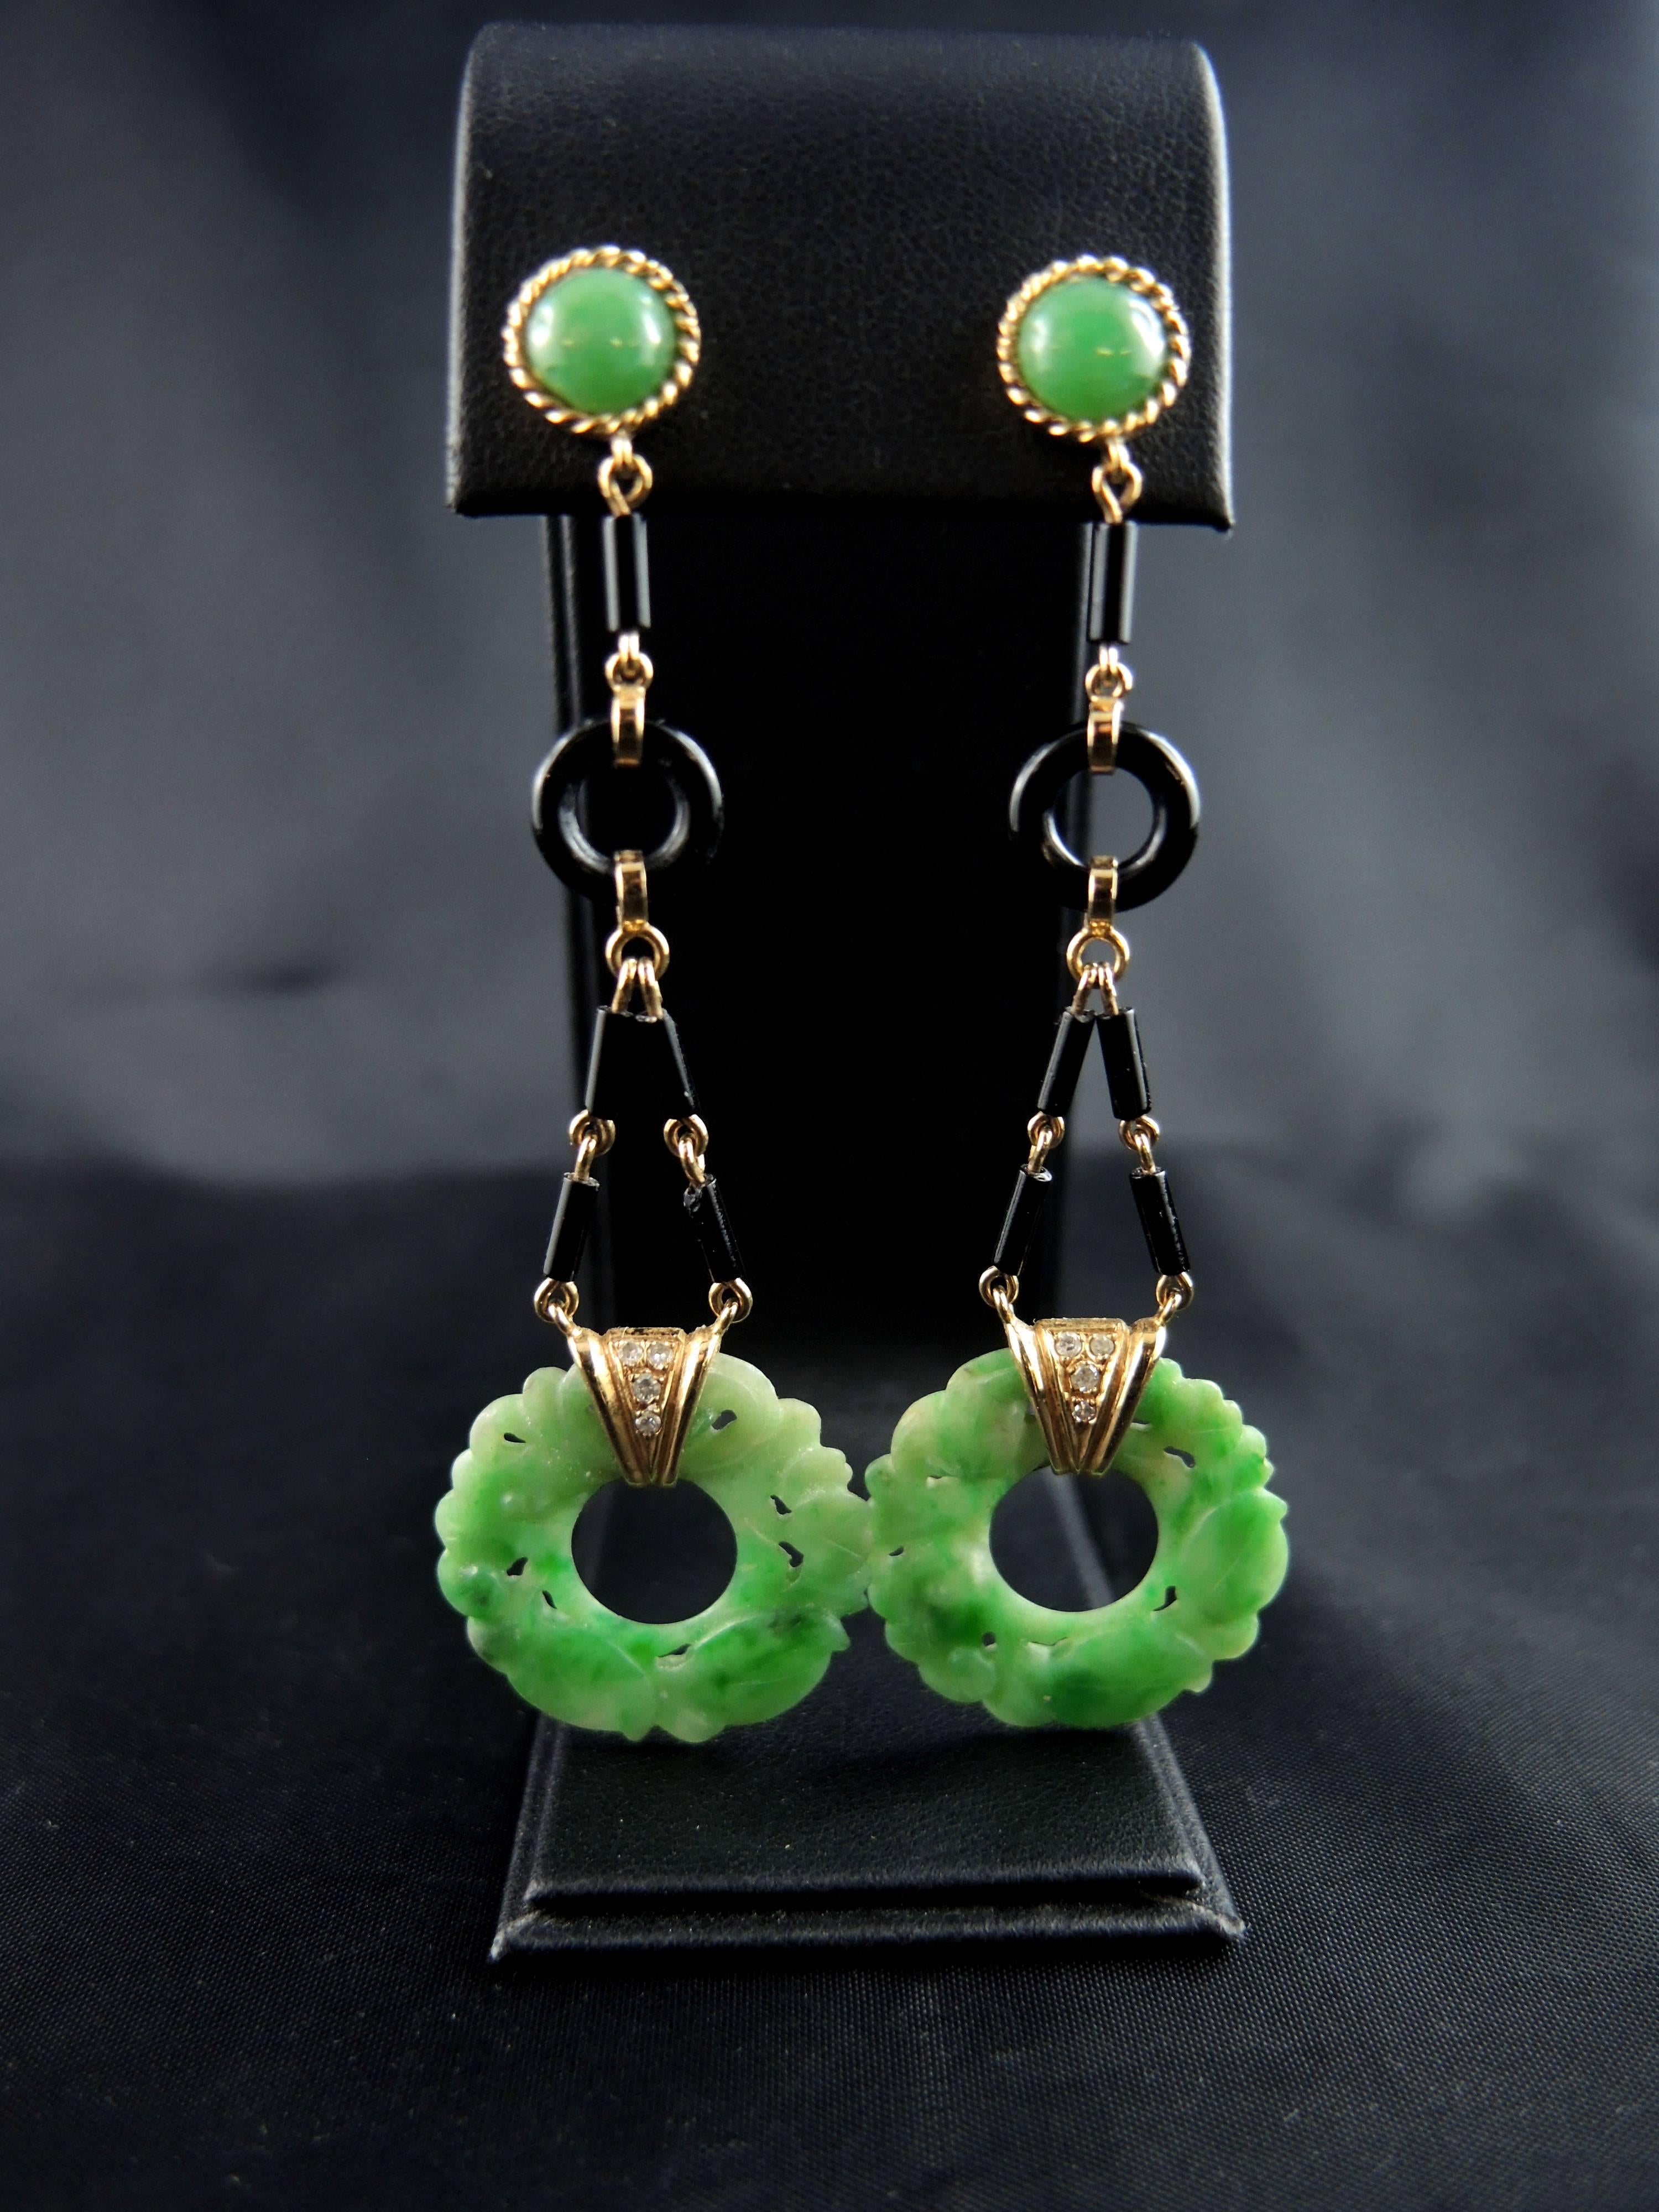 18kt gold earrings (quality mark: head of eagle) set with delicatly carved jadeite jade disks, onyx, and single cut diamonds.

French work from the 70ies with an asian style.